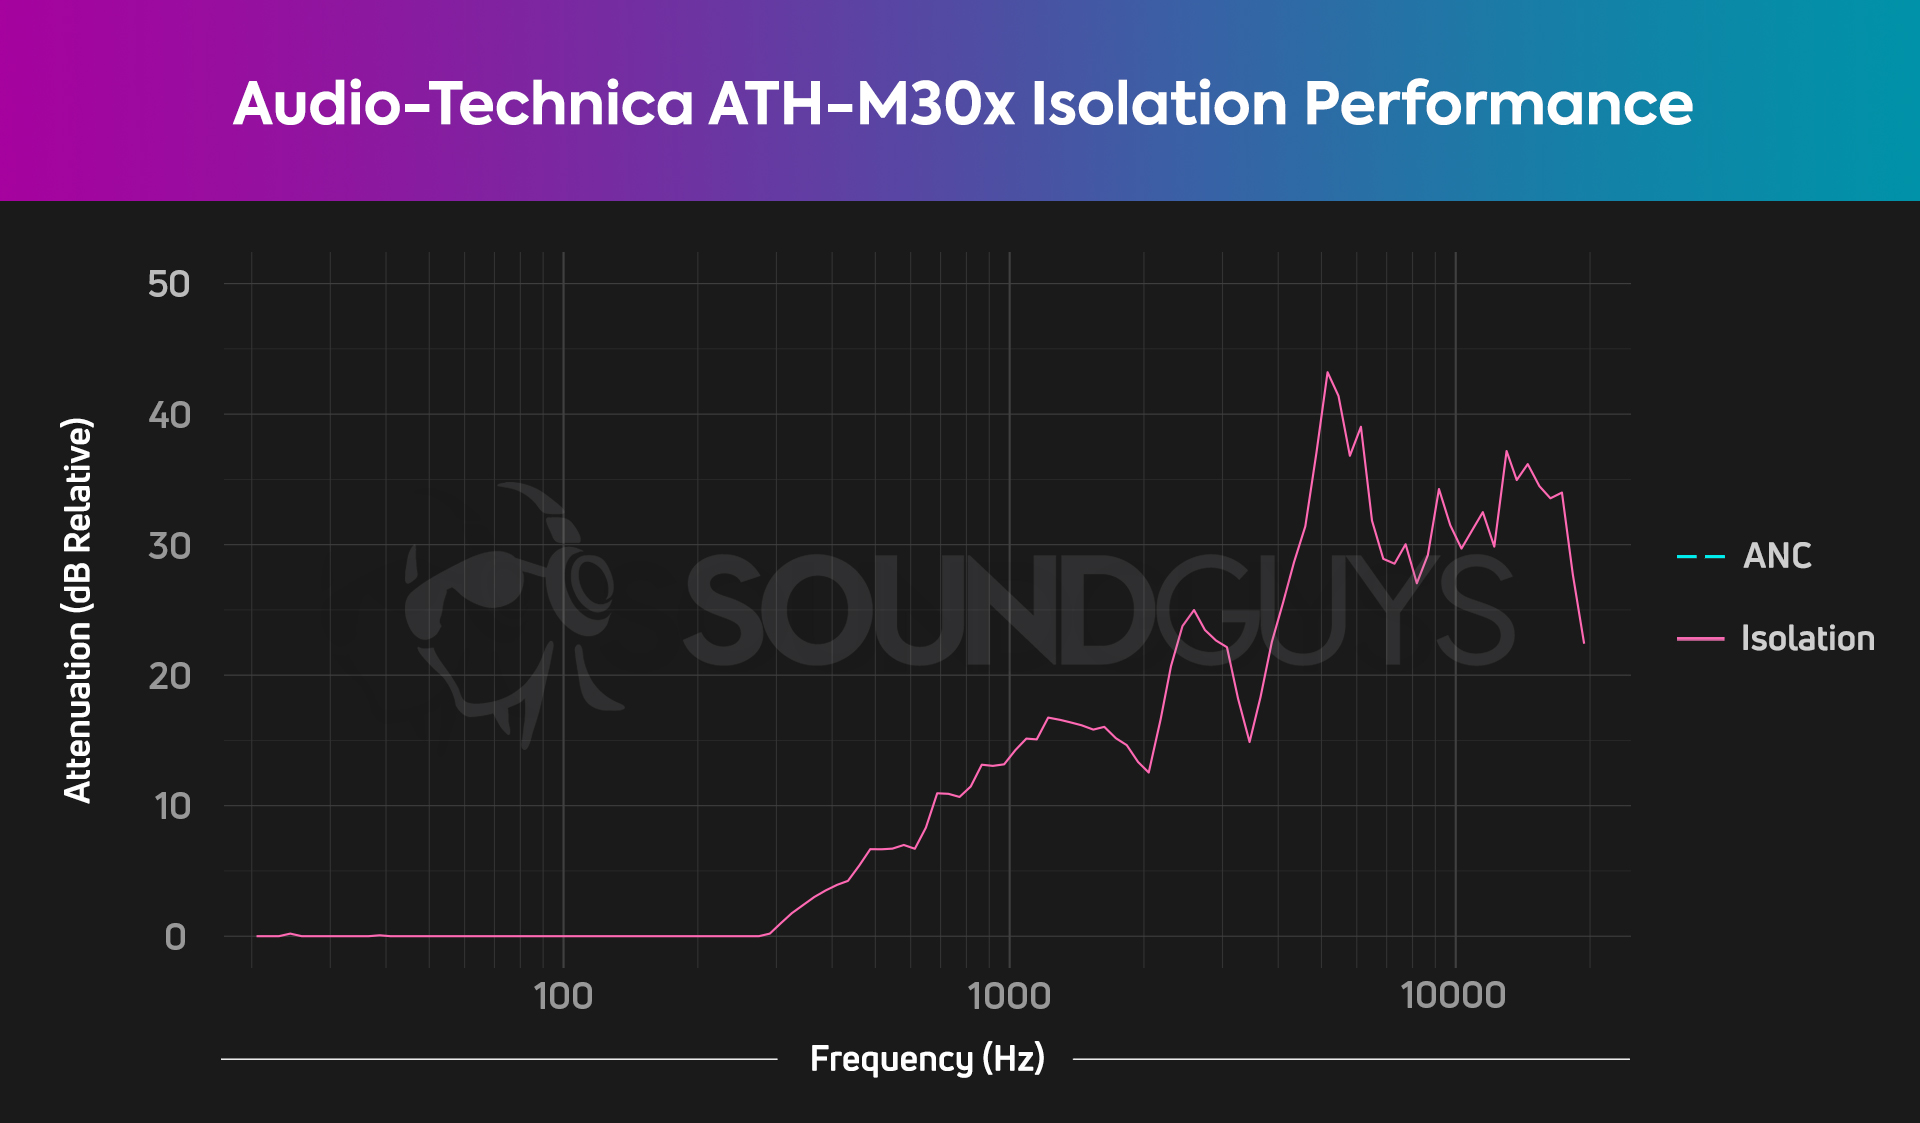 Chart showing the isolation performance of the Audio-Technica ATH-M30x isolation.